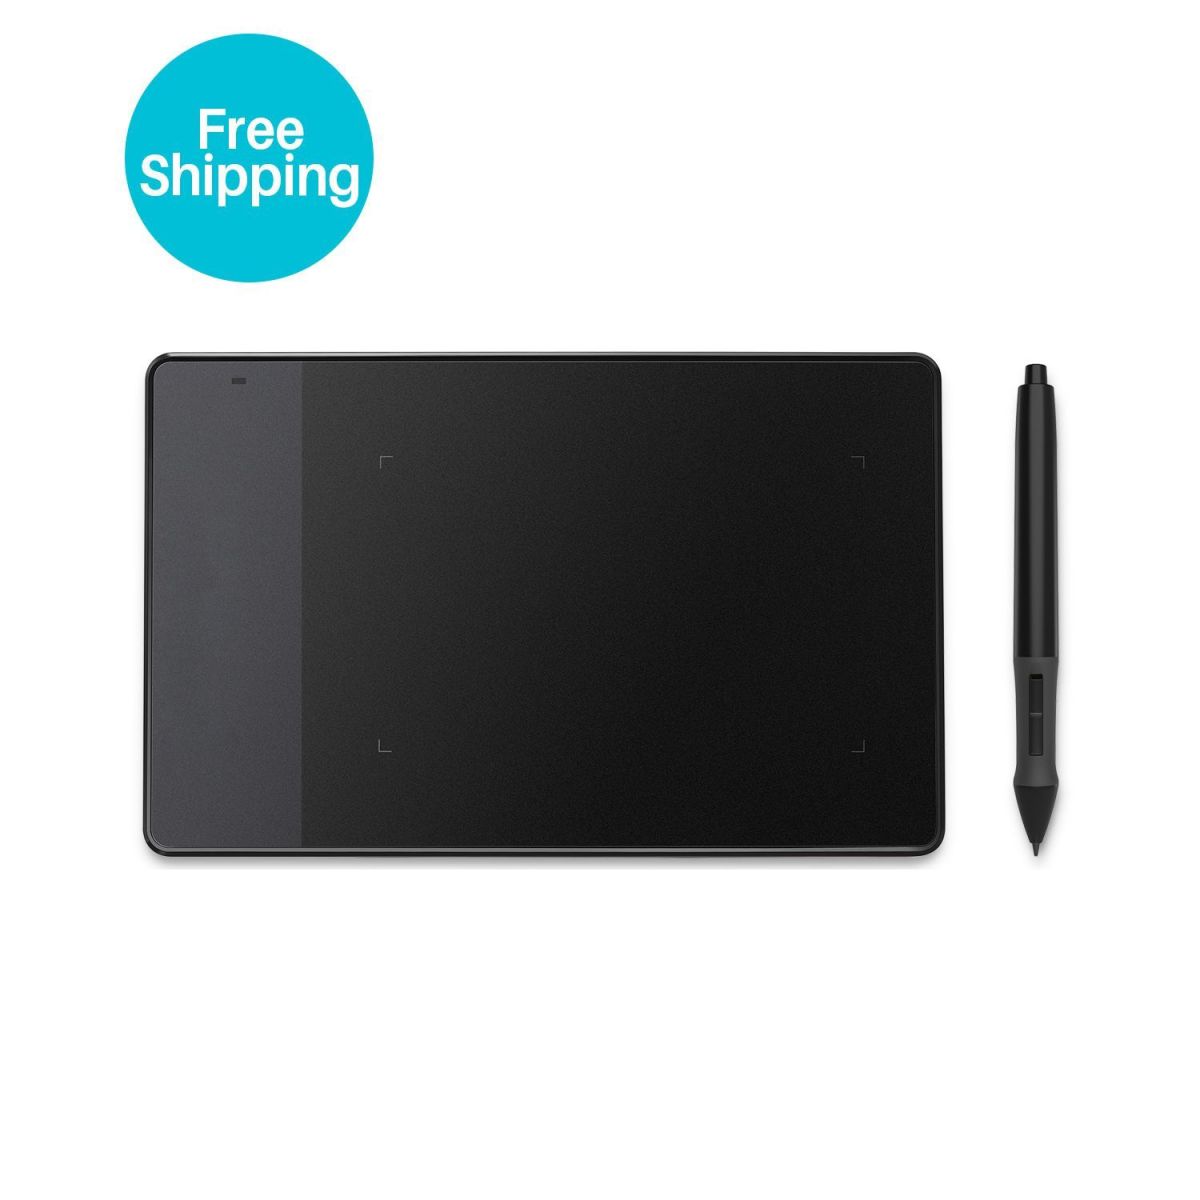 New Huion 420 4x2.23 USB Animation Digitizer Graphics Drawing Tablet